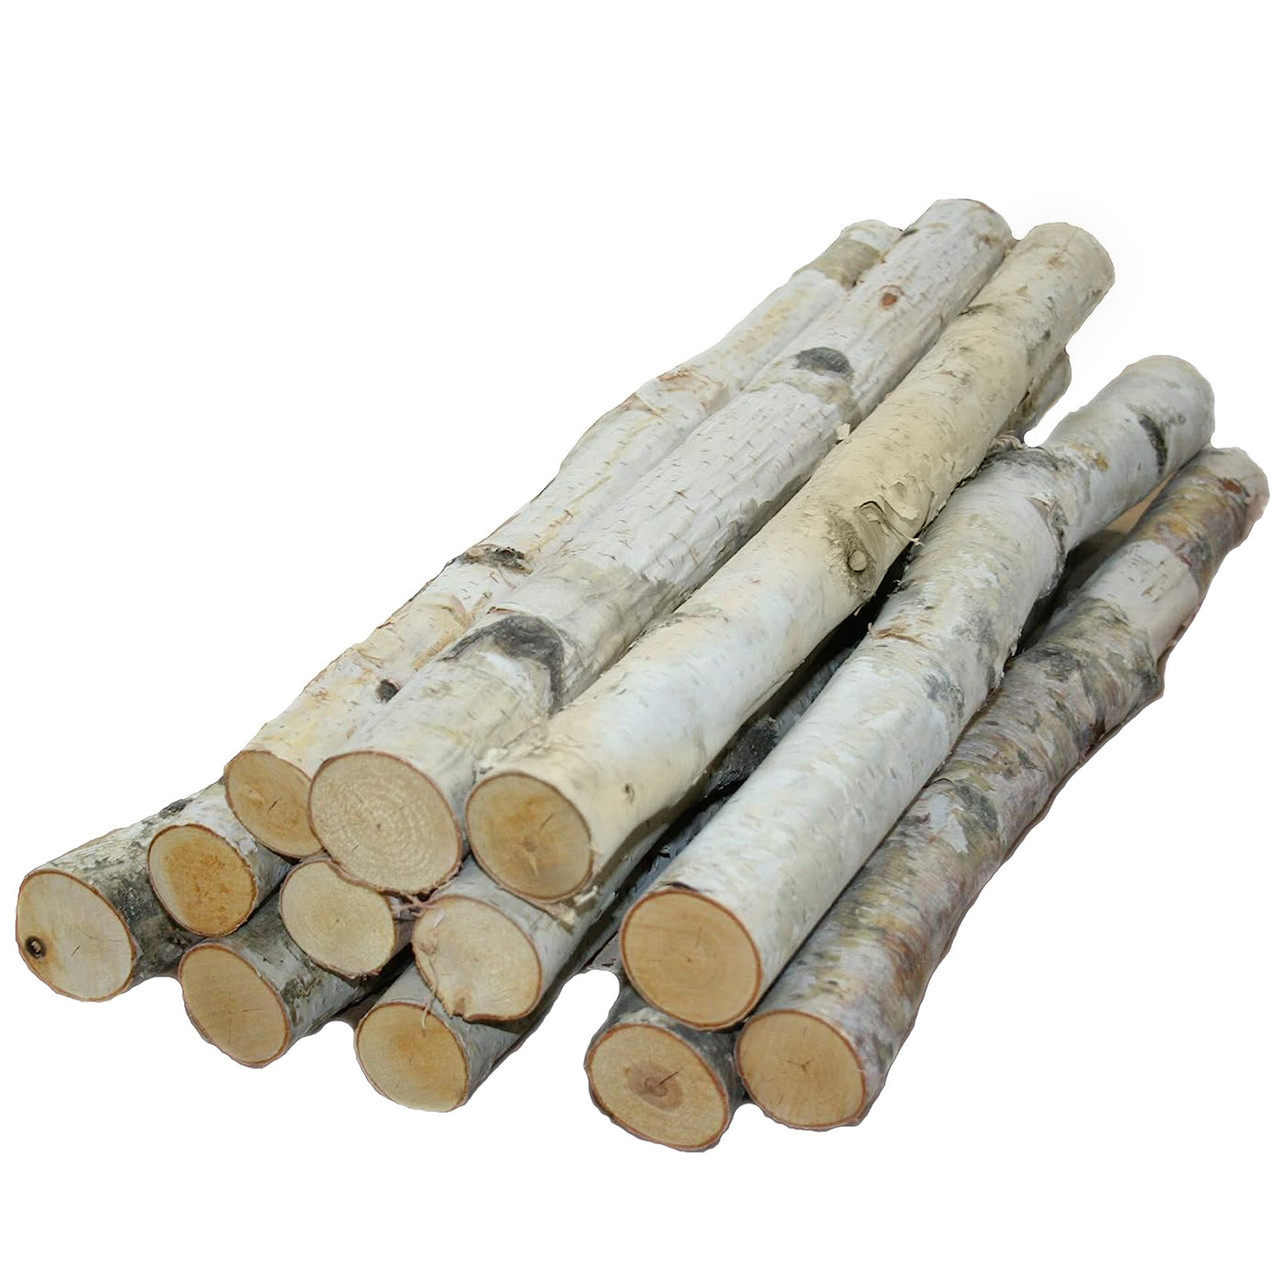 Wilson Decorative White Birch Logs, Natural Bark Wood Home Décor (Set of  12) - 17-18 in Length 1-1.5 Dia.